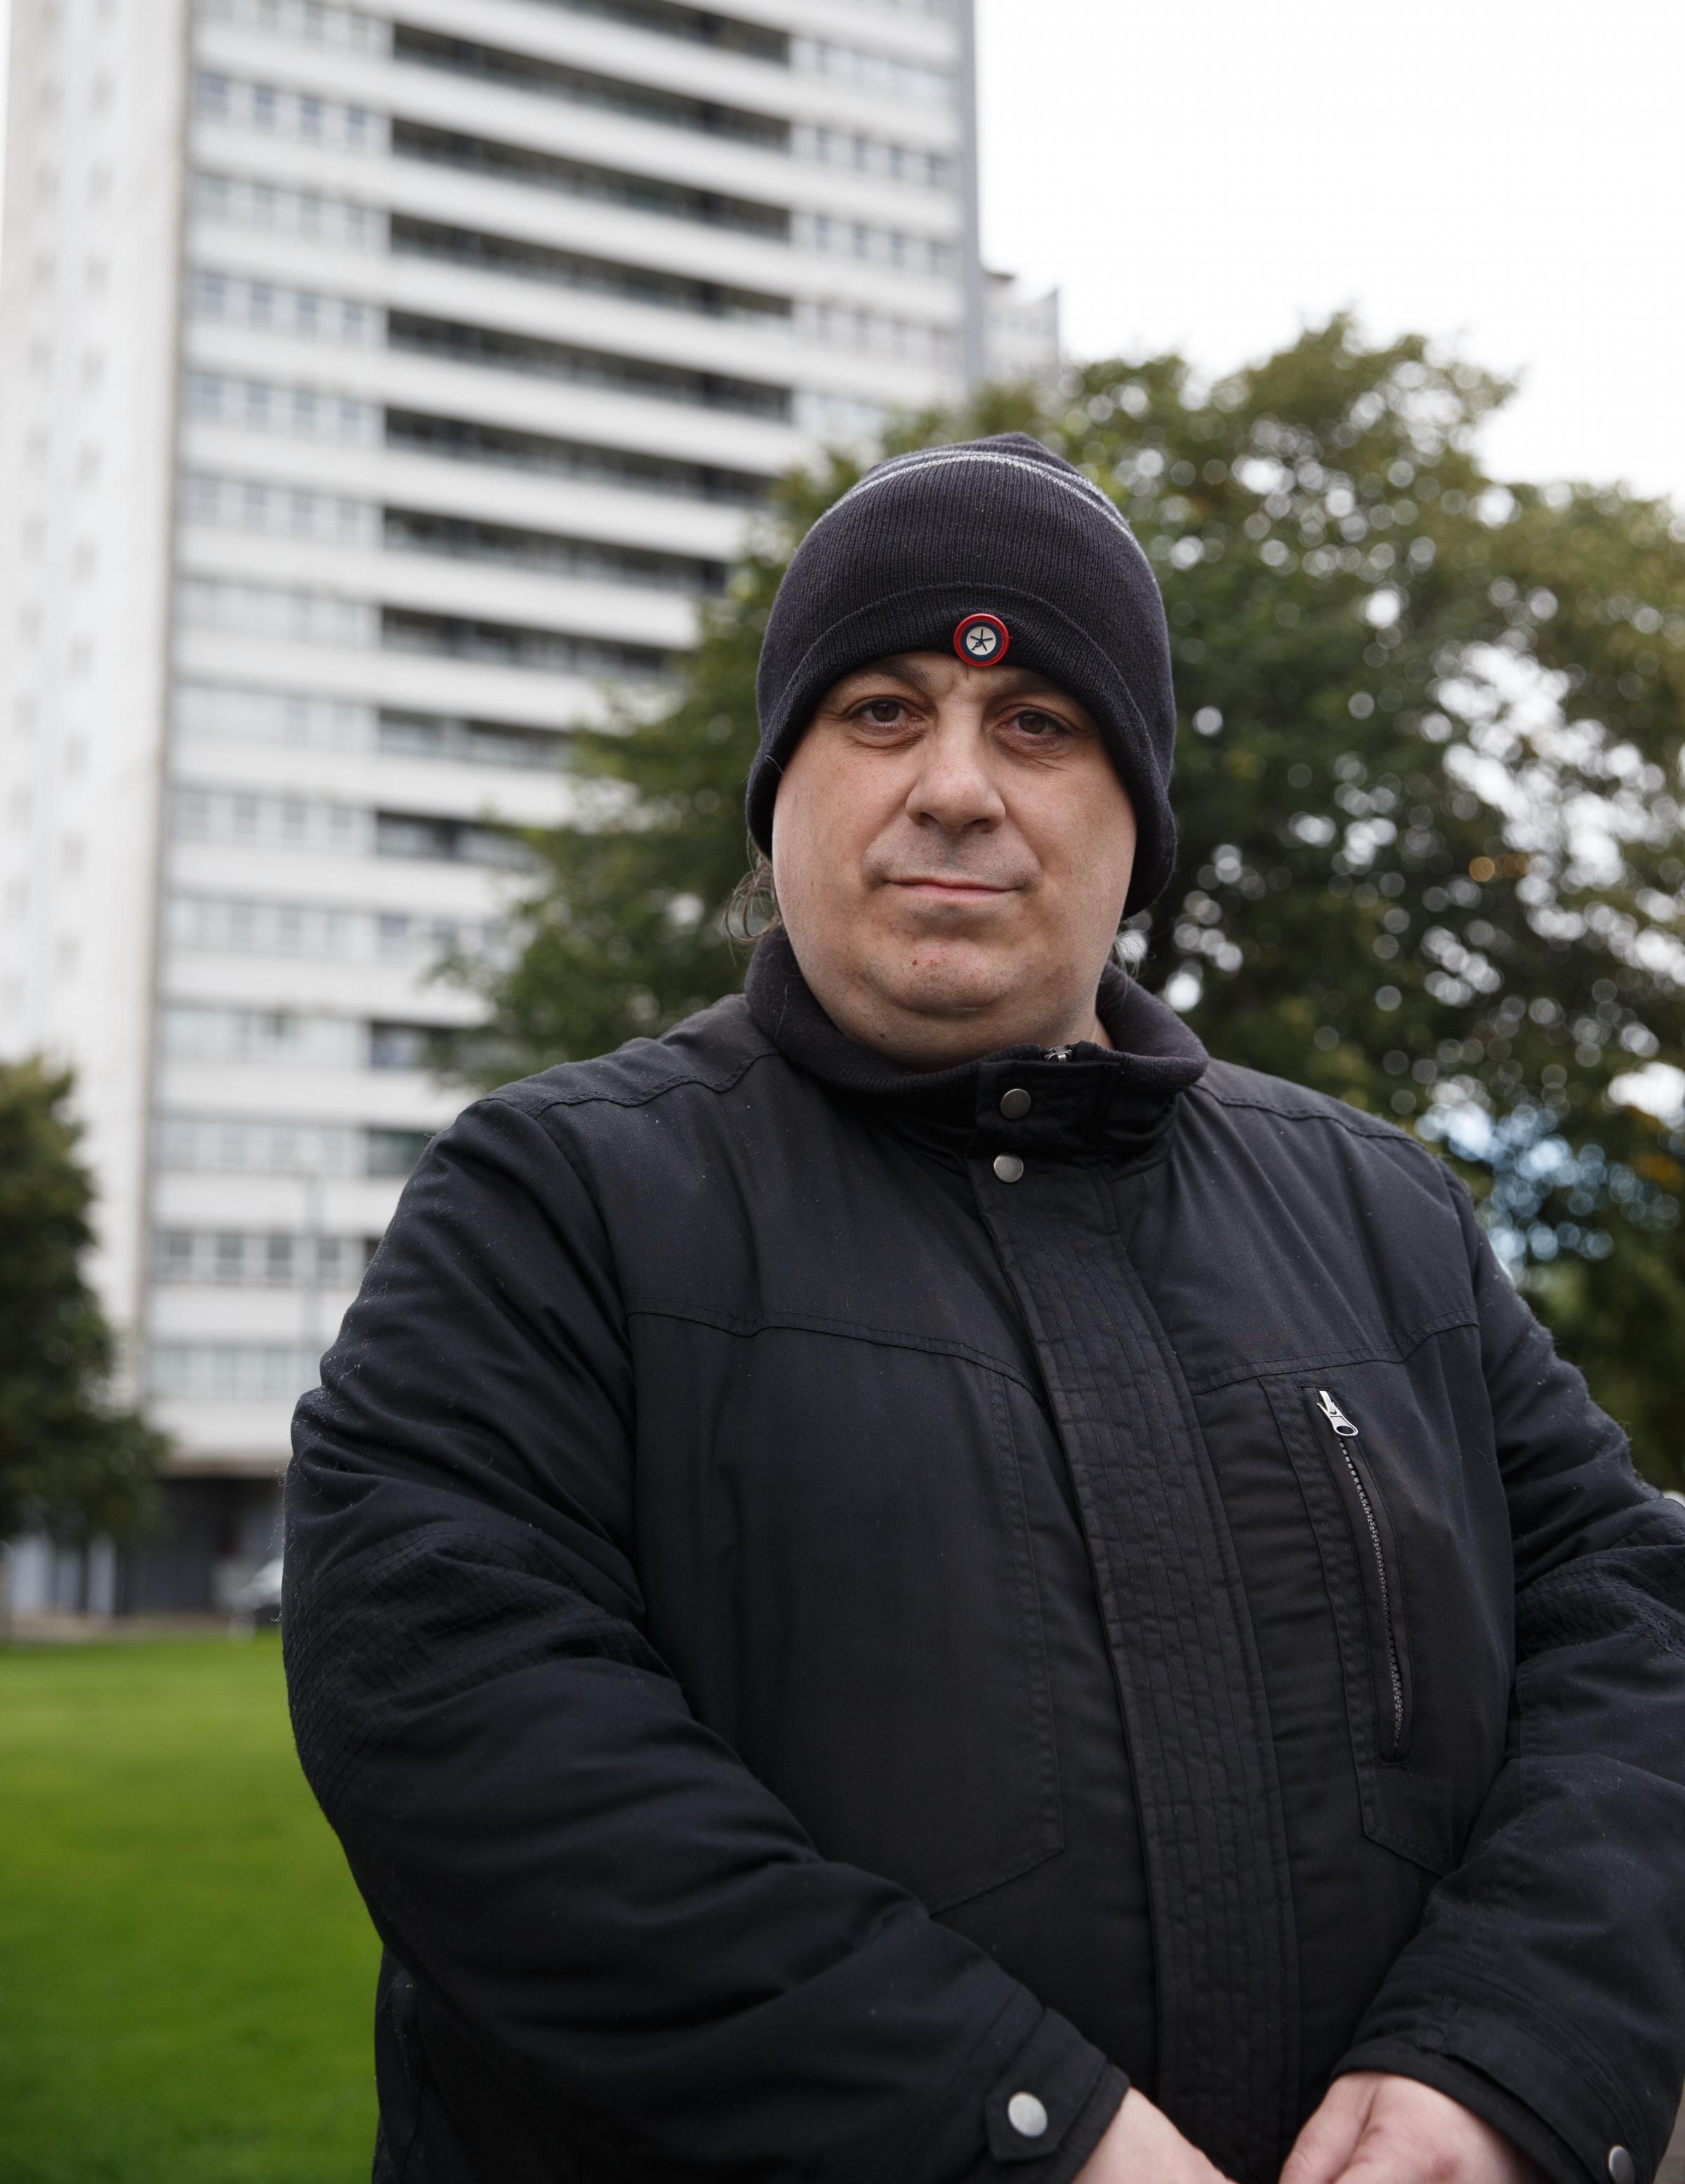 Resident William Doolan pictured at the tower blocks at The Wyndford, Maryhill, Glasgow. Photograph by Colin Mearns.